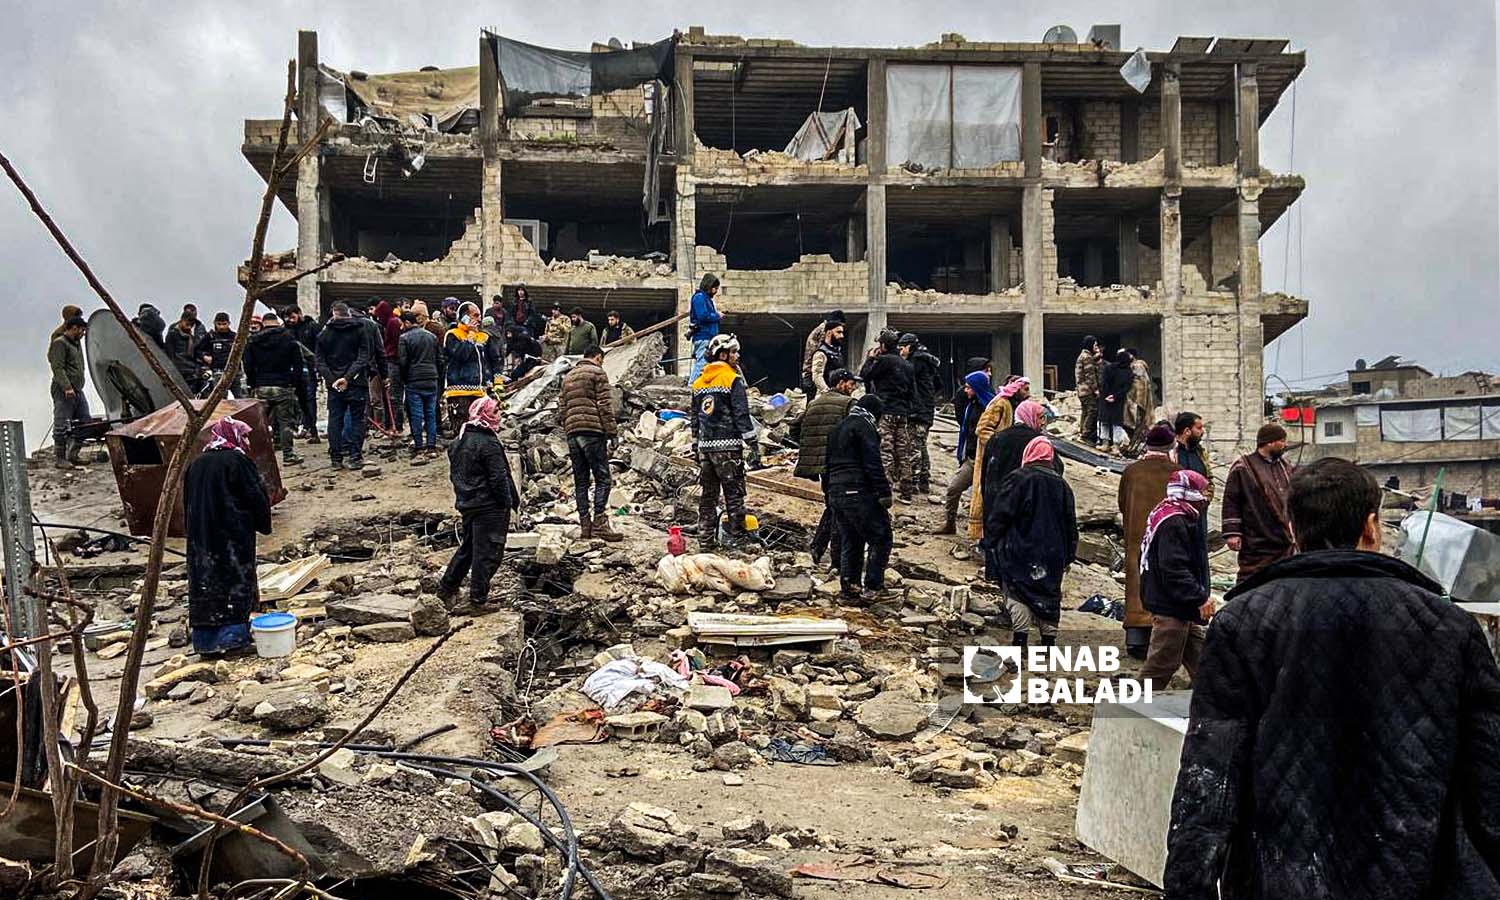 Syria Civil Defense workers and volunteer residents try to rescue and remove the victims who were trapped under the rubble in the Jindires area in the countryside of Afrin city, following an earthquake that struck northwestern Syria - February 6, 2023 (Enab Baladi/Amir Kharboutli)